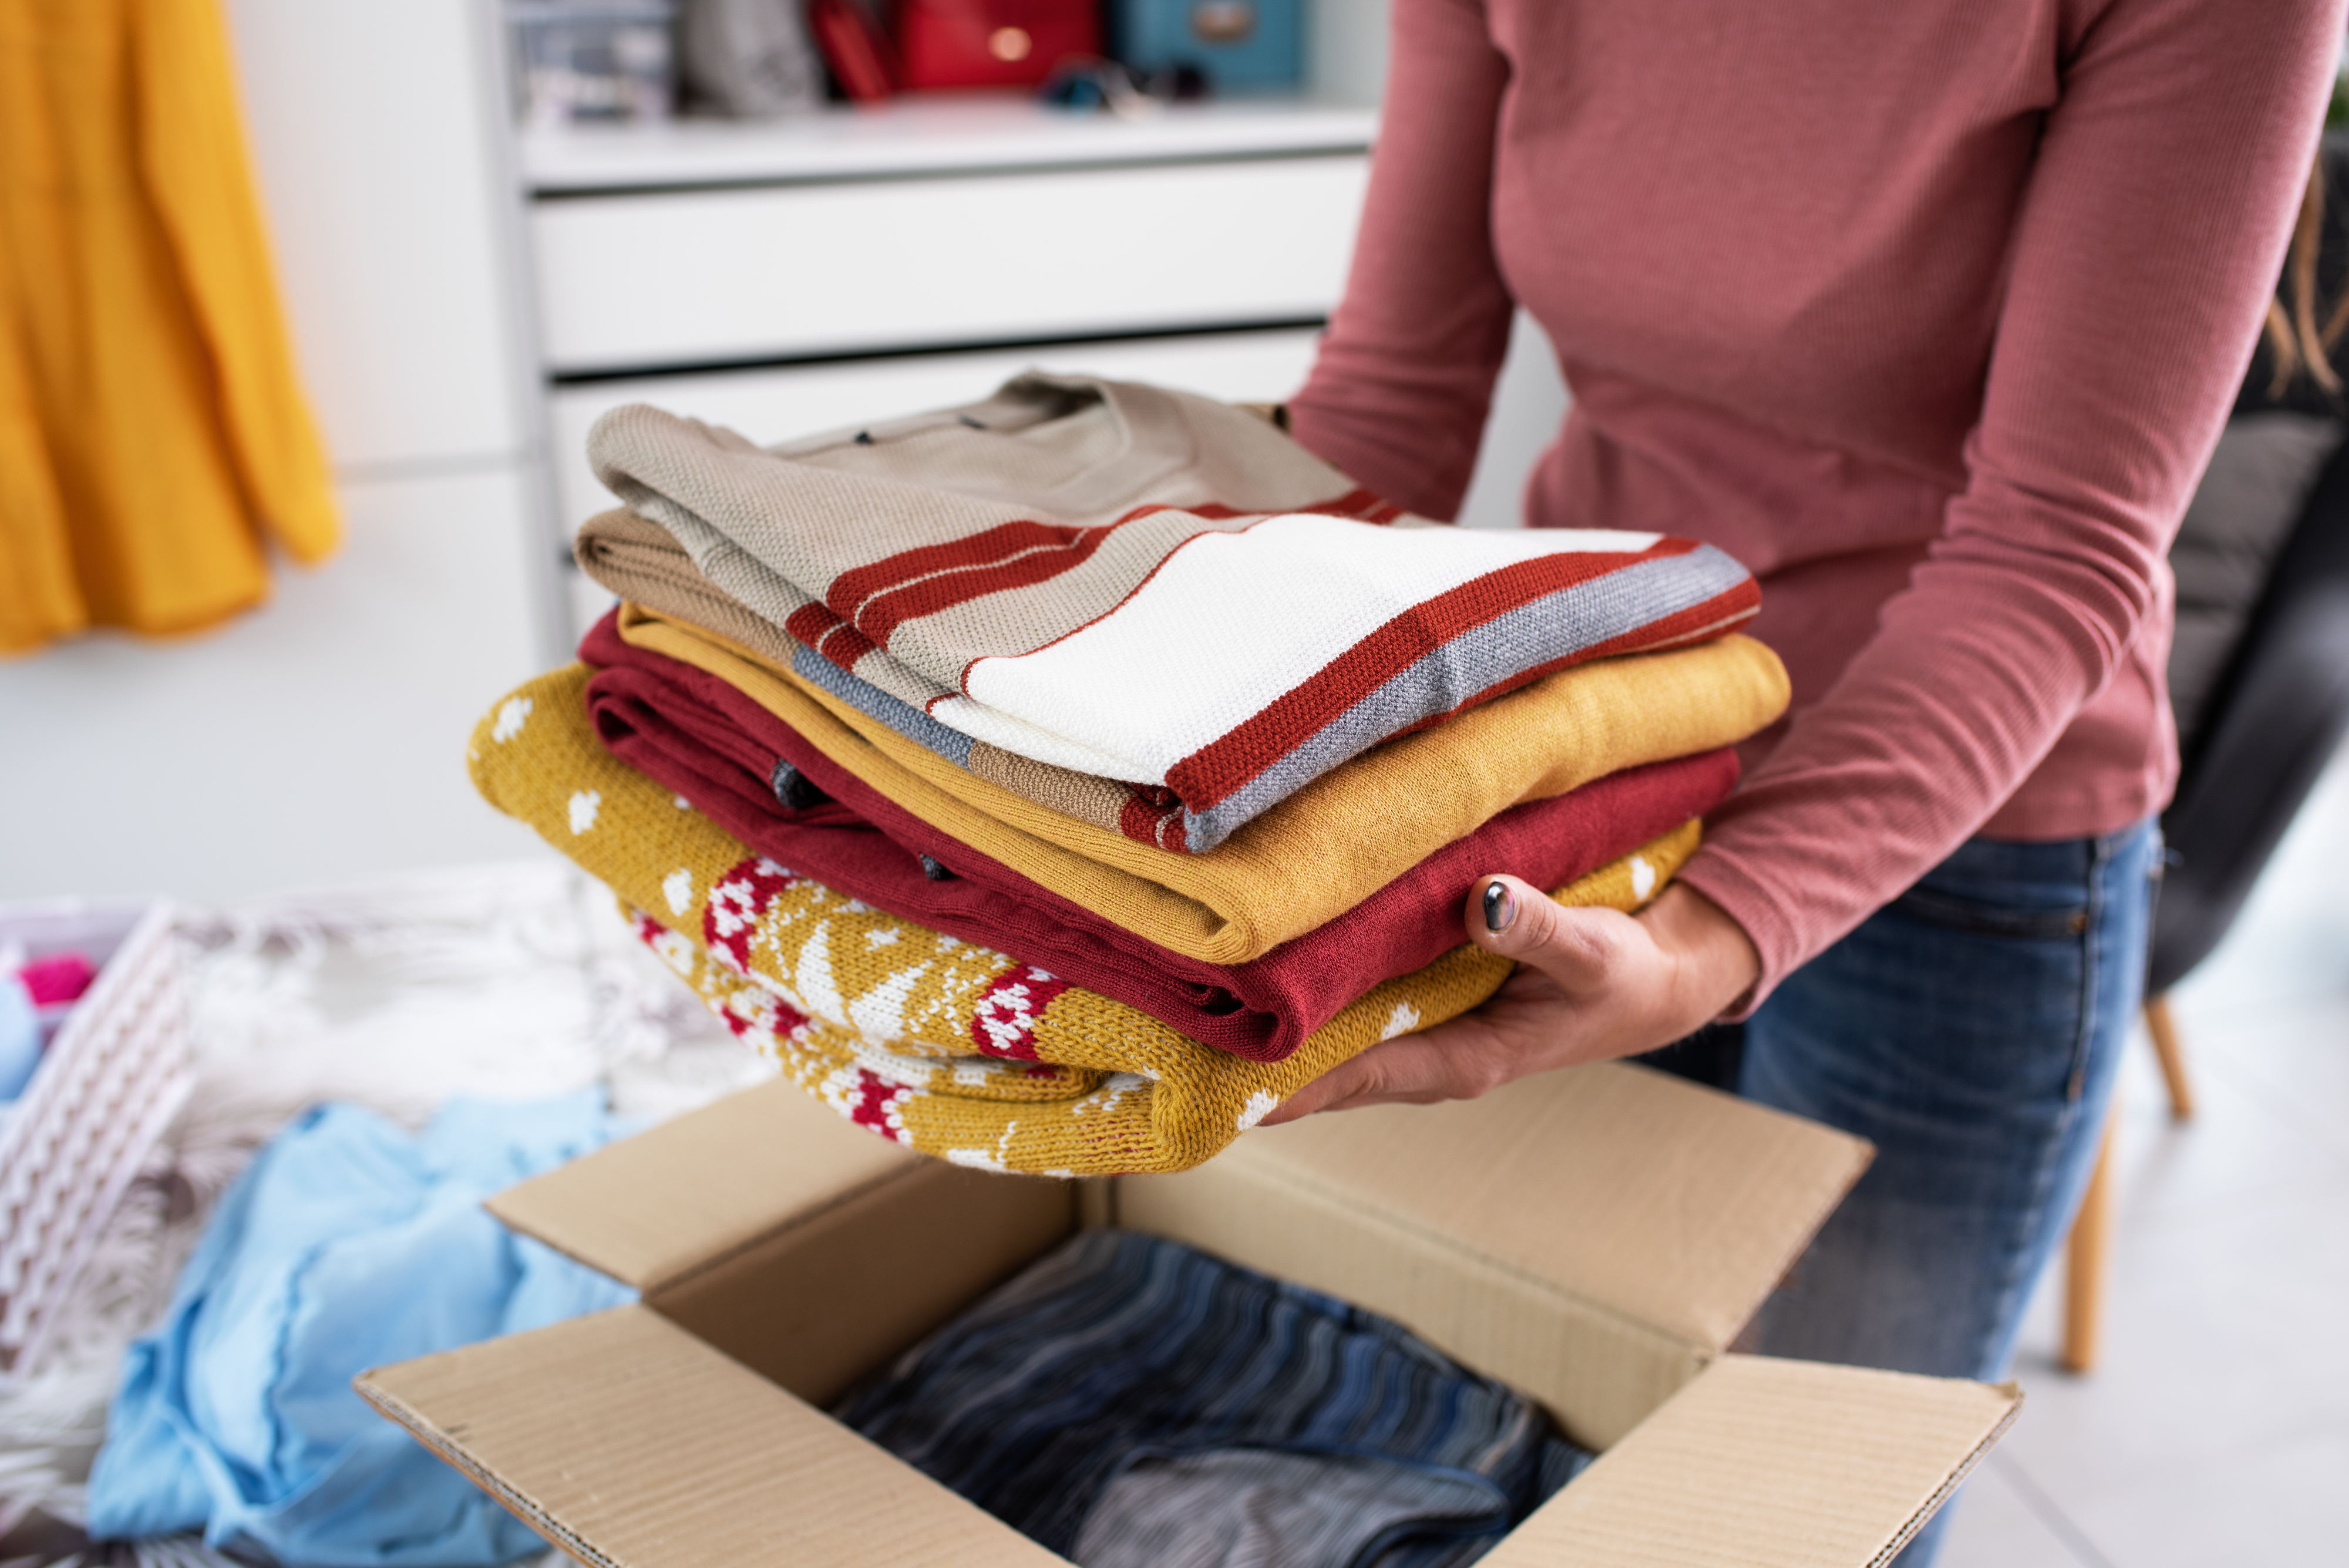 A person holds a stack of neatly folded clothes above an open cardboard box